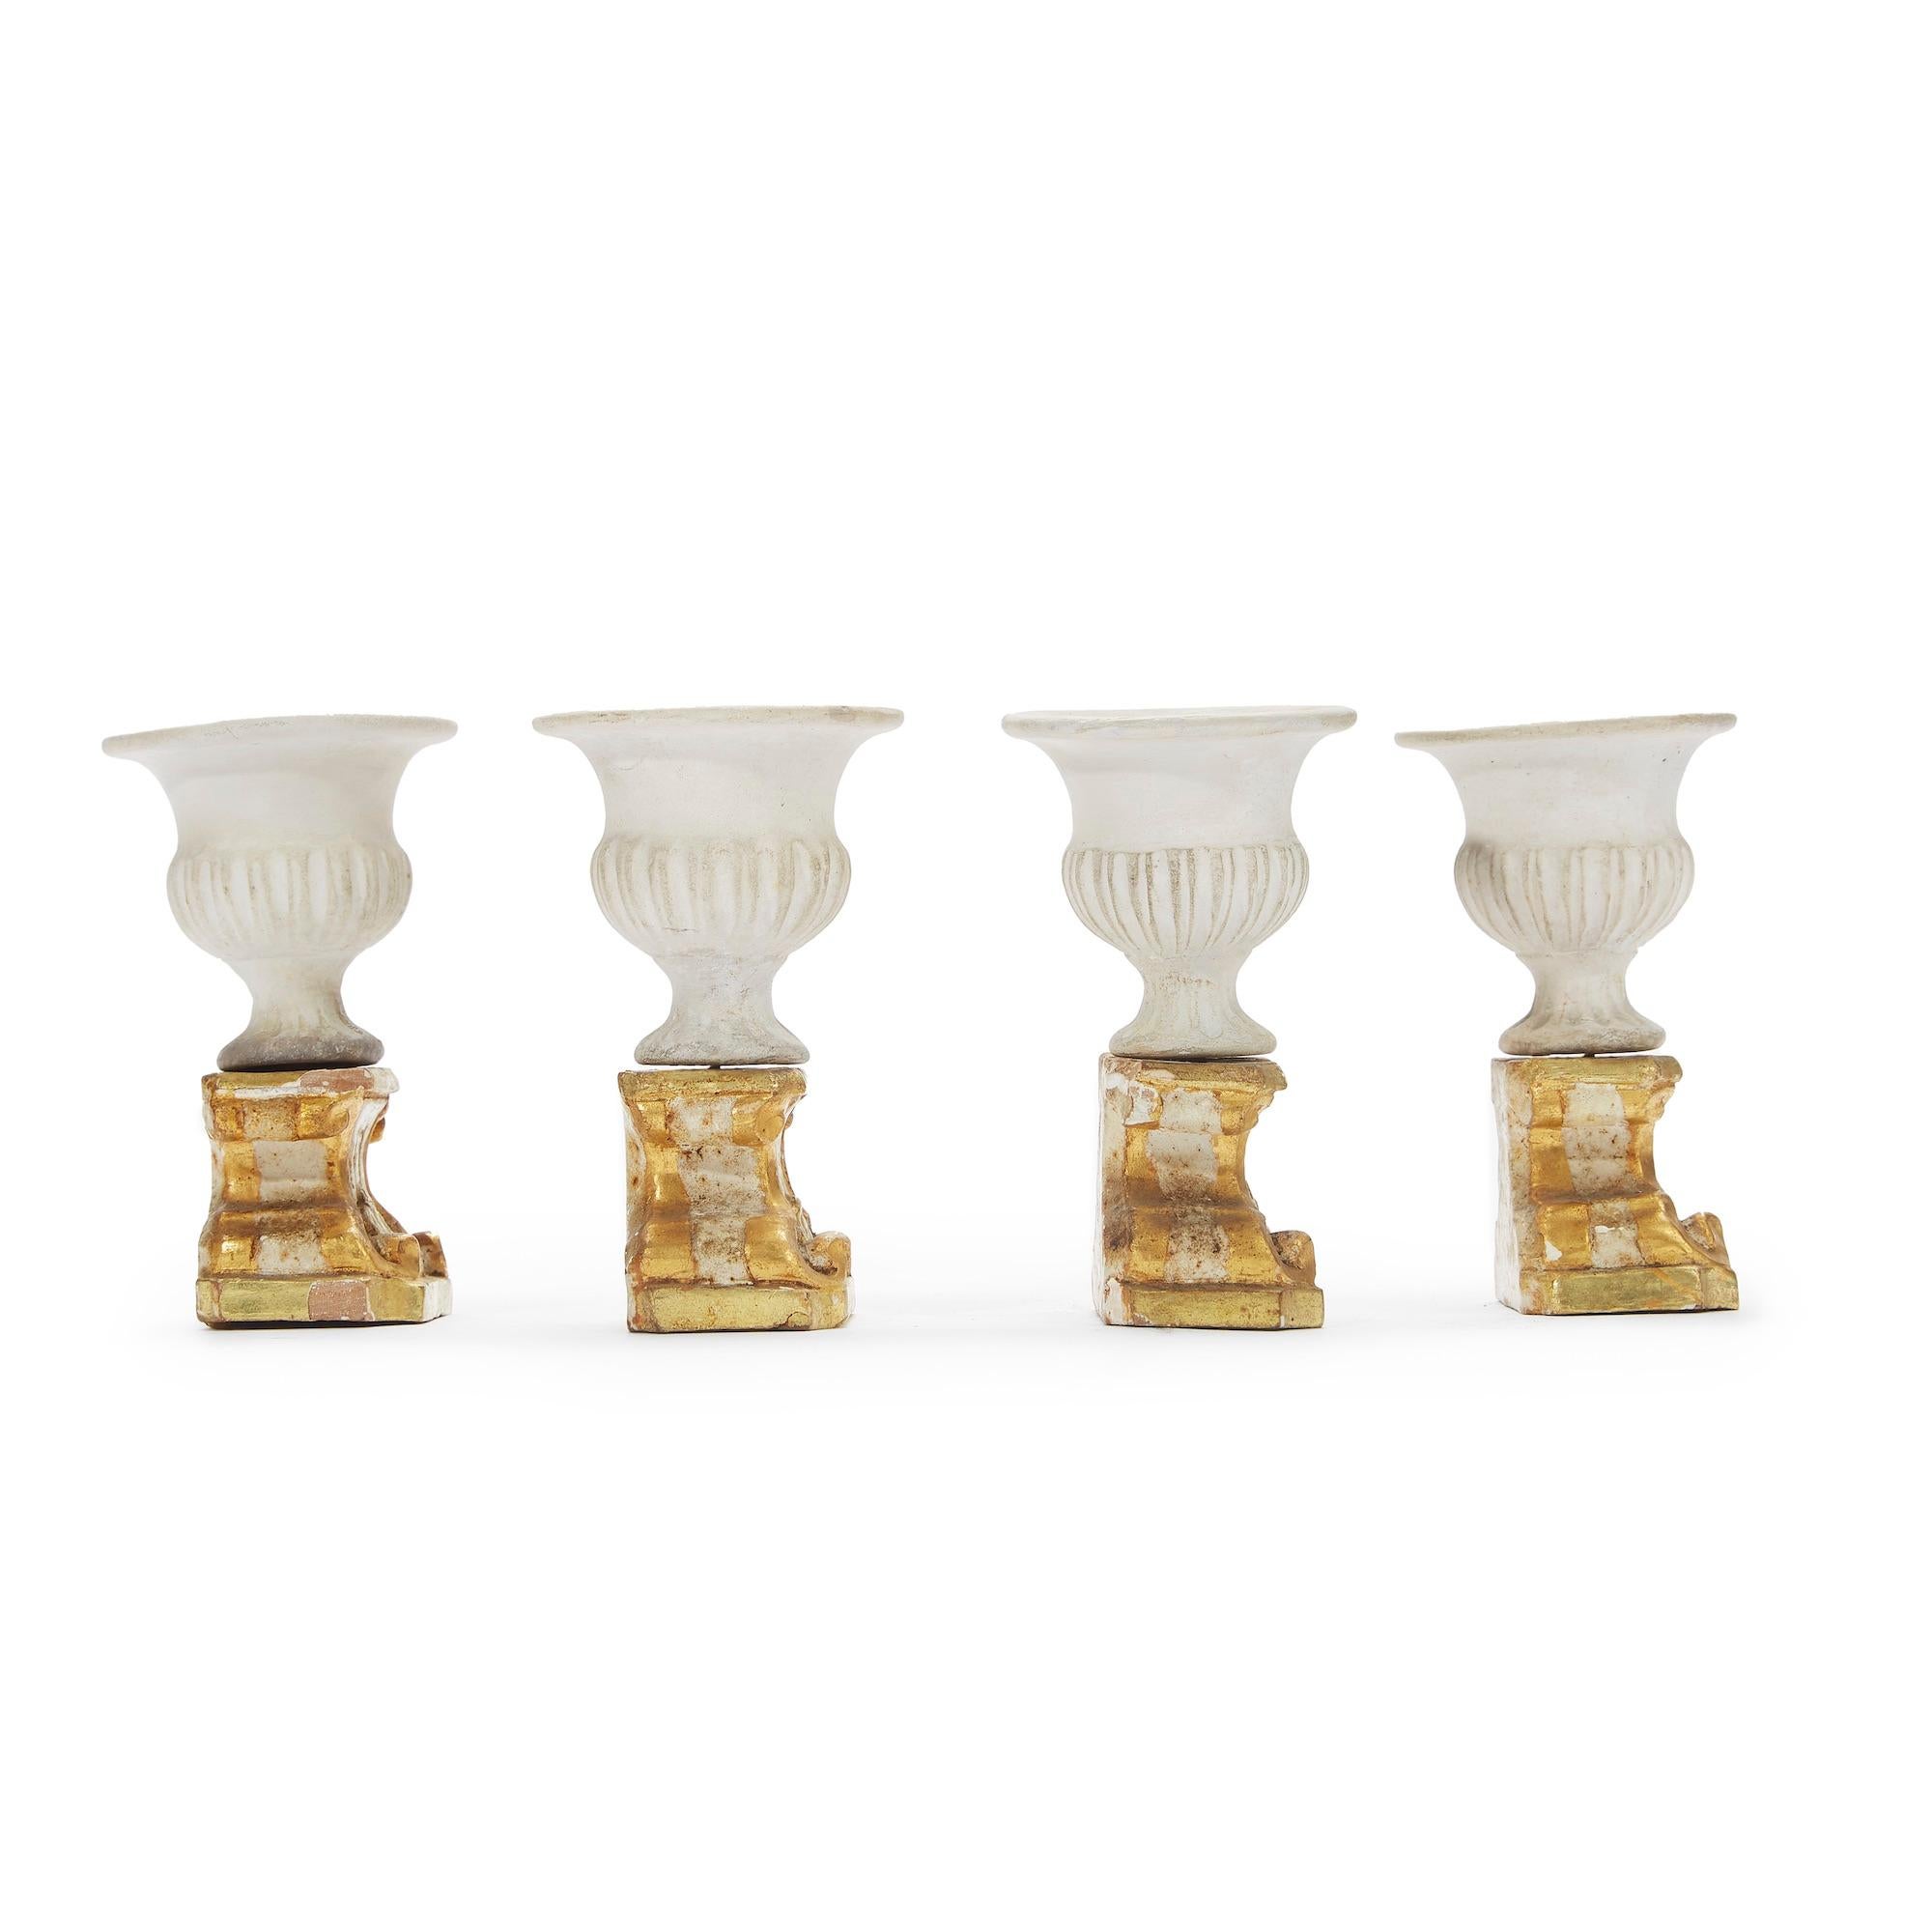 Four neoclassical biscuit and giltwood table decorations a set of four lovely small antique biscuit porcelain craters on giltwood basements with acanthus leaves and scroll carving ornaments.

The four neoclassical artworks come from a private